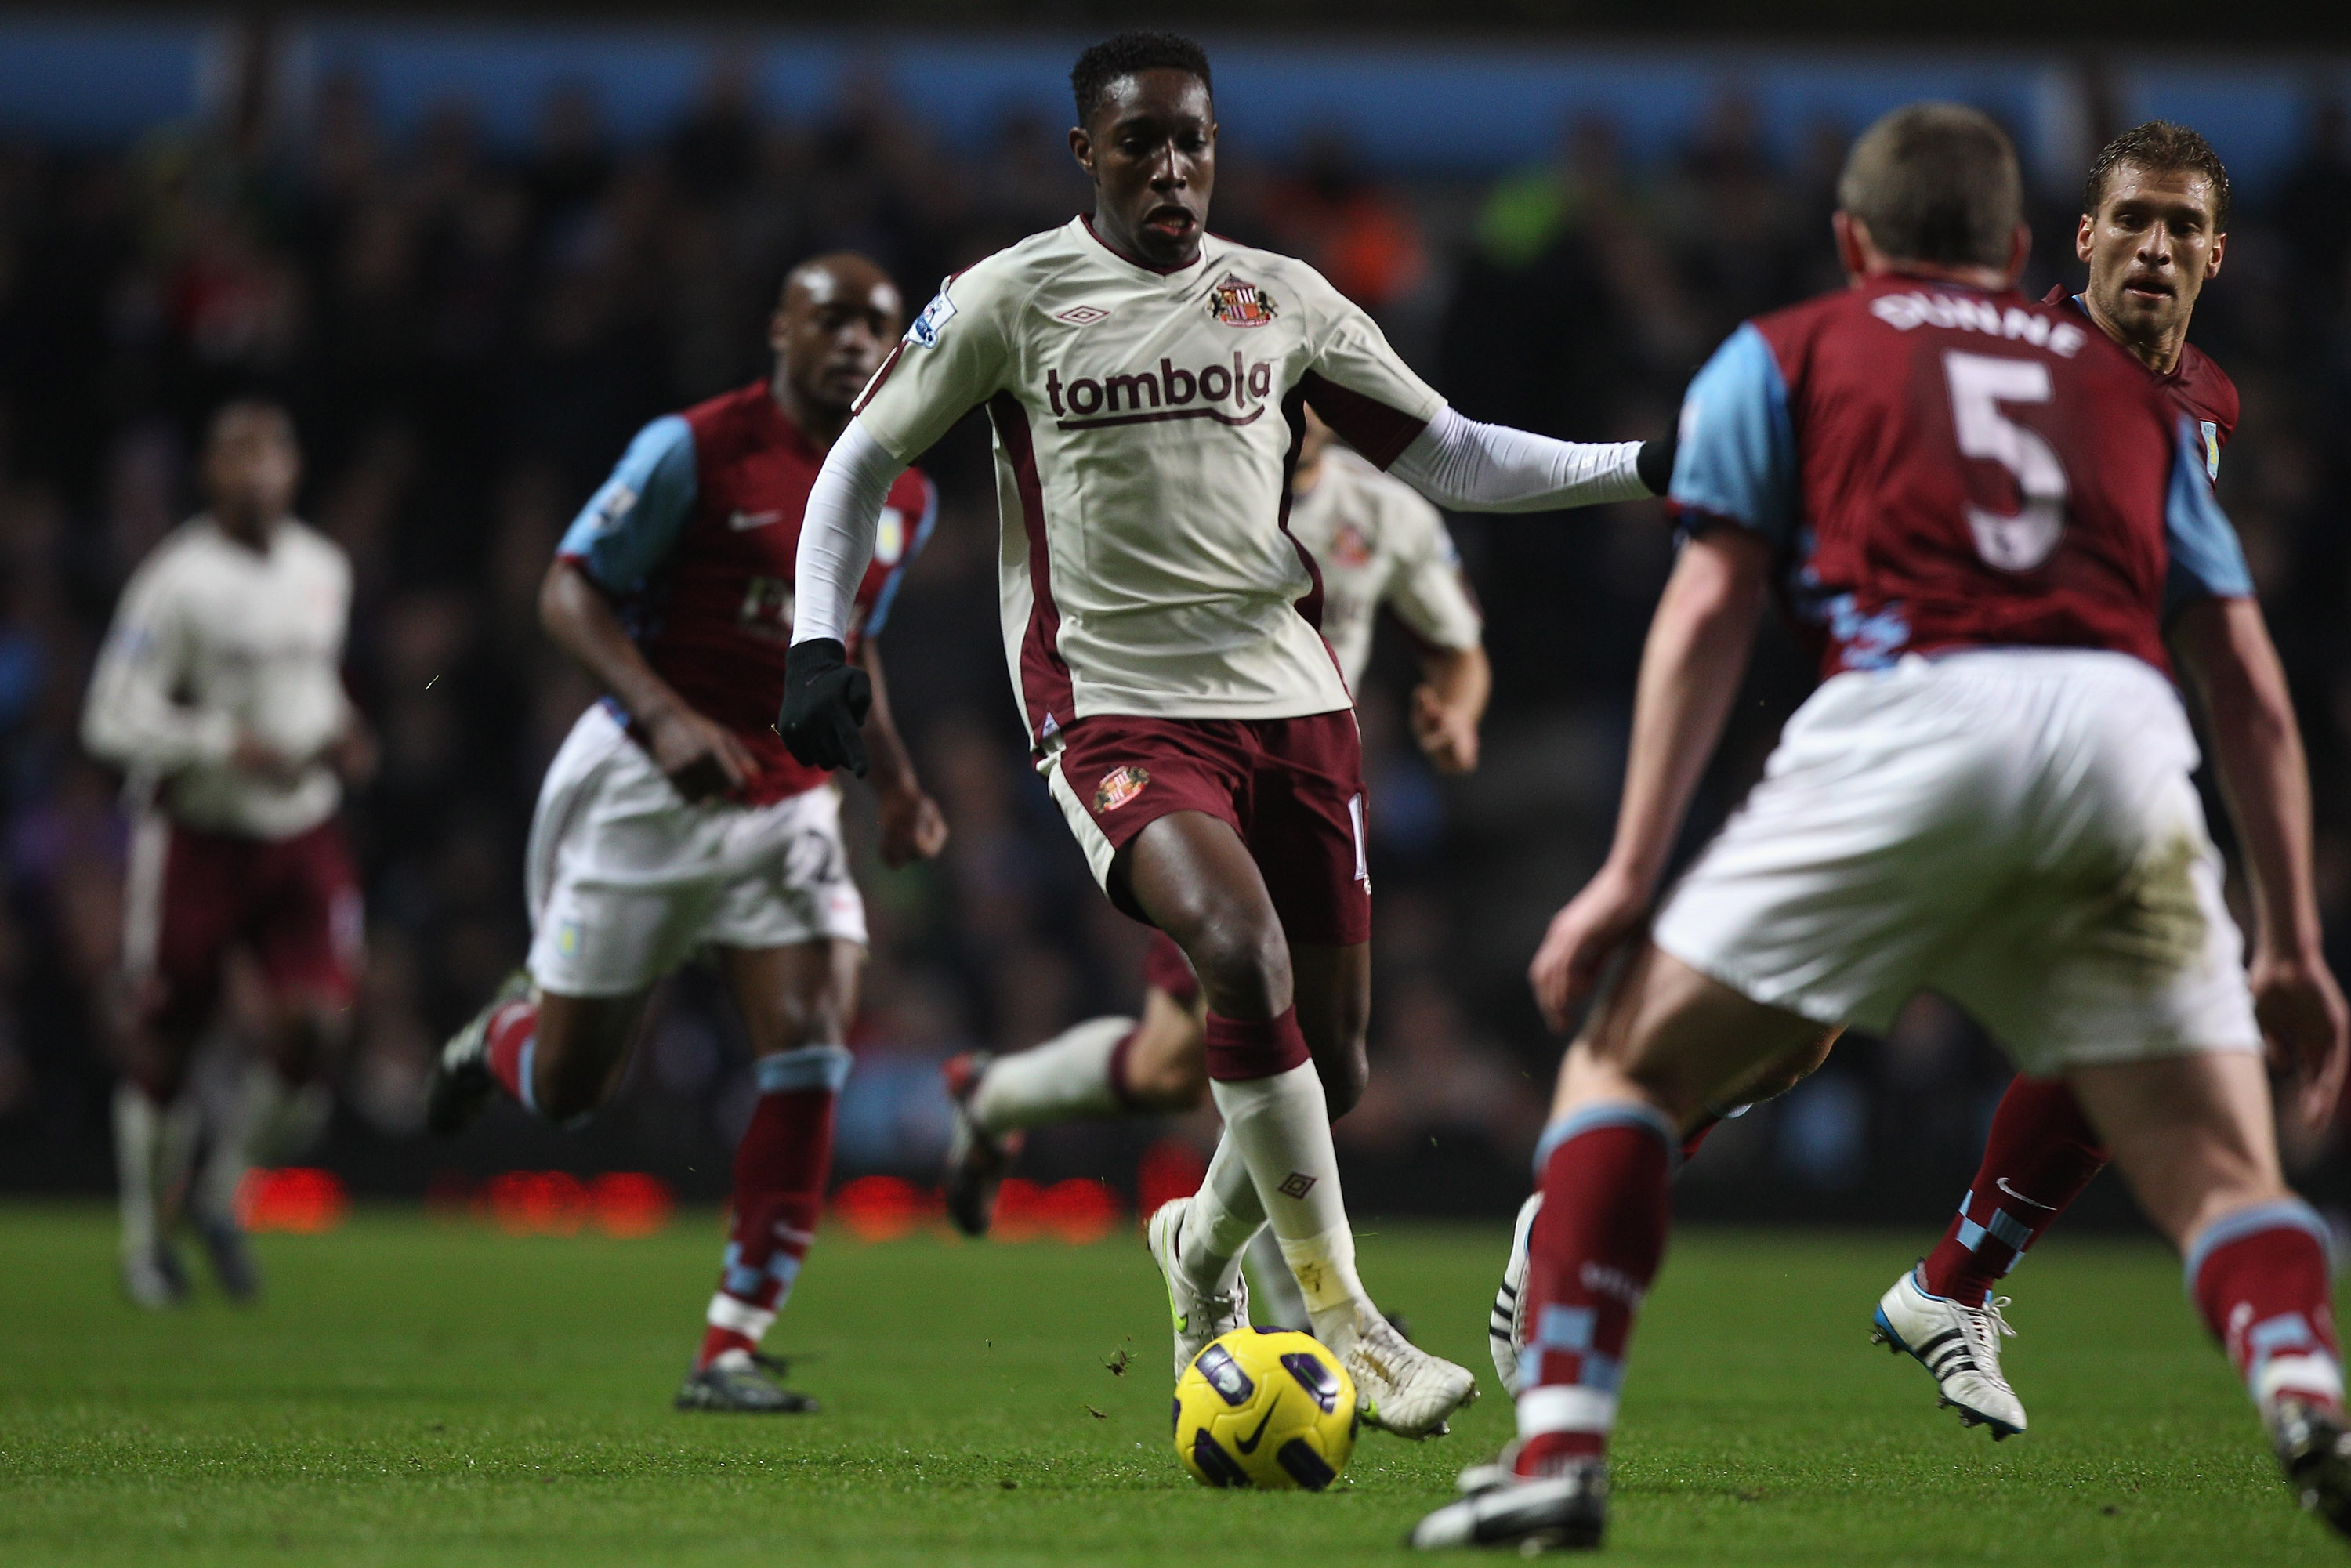 BIRMINGHAM, ENGLAND - JANUARY 05:  Danny Welbeck of Sunderland closed down by Richard Dunne of Aston Villa during the Barclays Premier League match between Aston Villa and Sunderland at Villa Park on January 5, 2011 in Birmingham, England.  (Photo by Mich